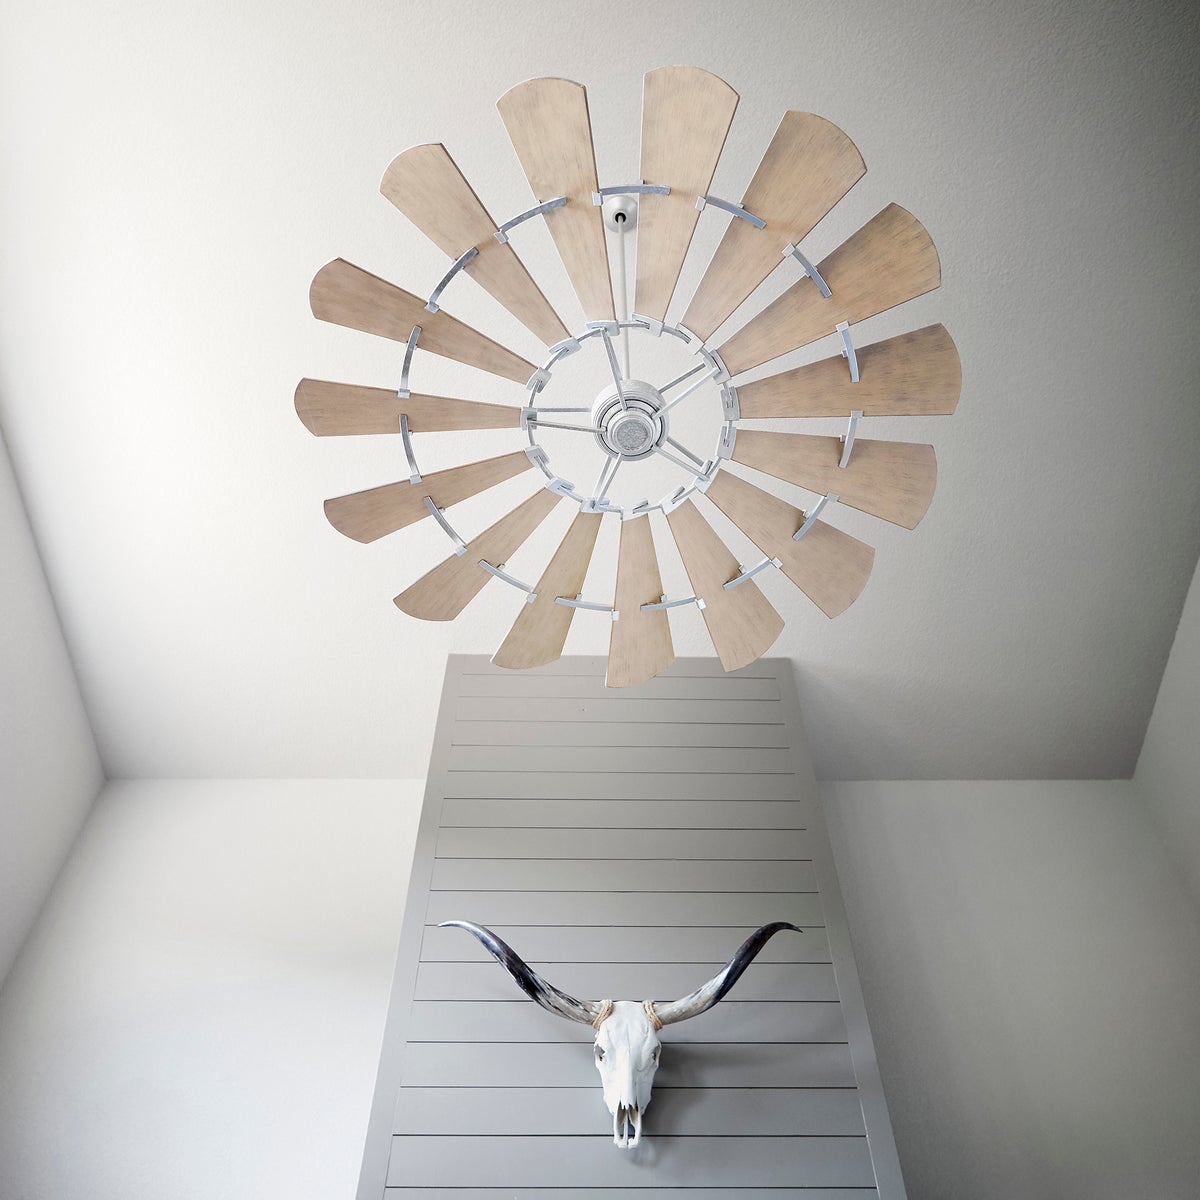 Farmhouse Ceiling Fan with 15 weathered oak wooden blades, rustic windmill-inspired design. UL Listed for dry locations. Limited Lifetime warranty.